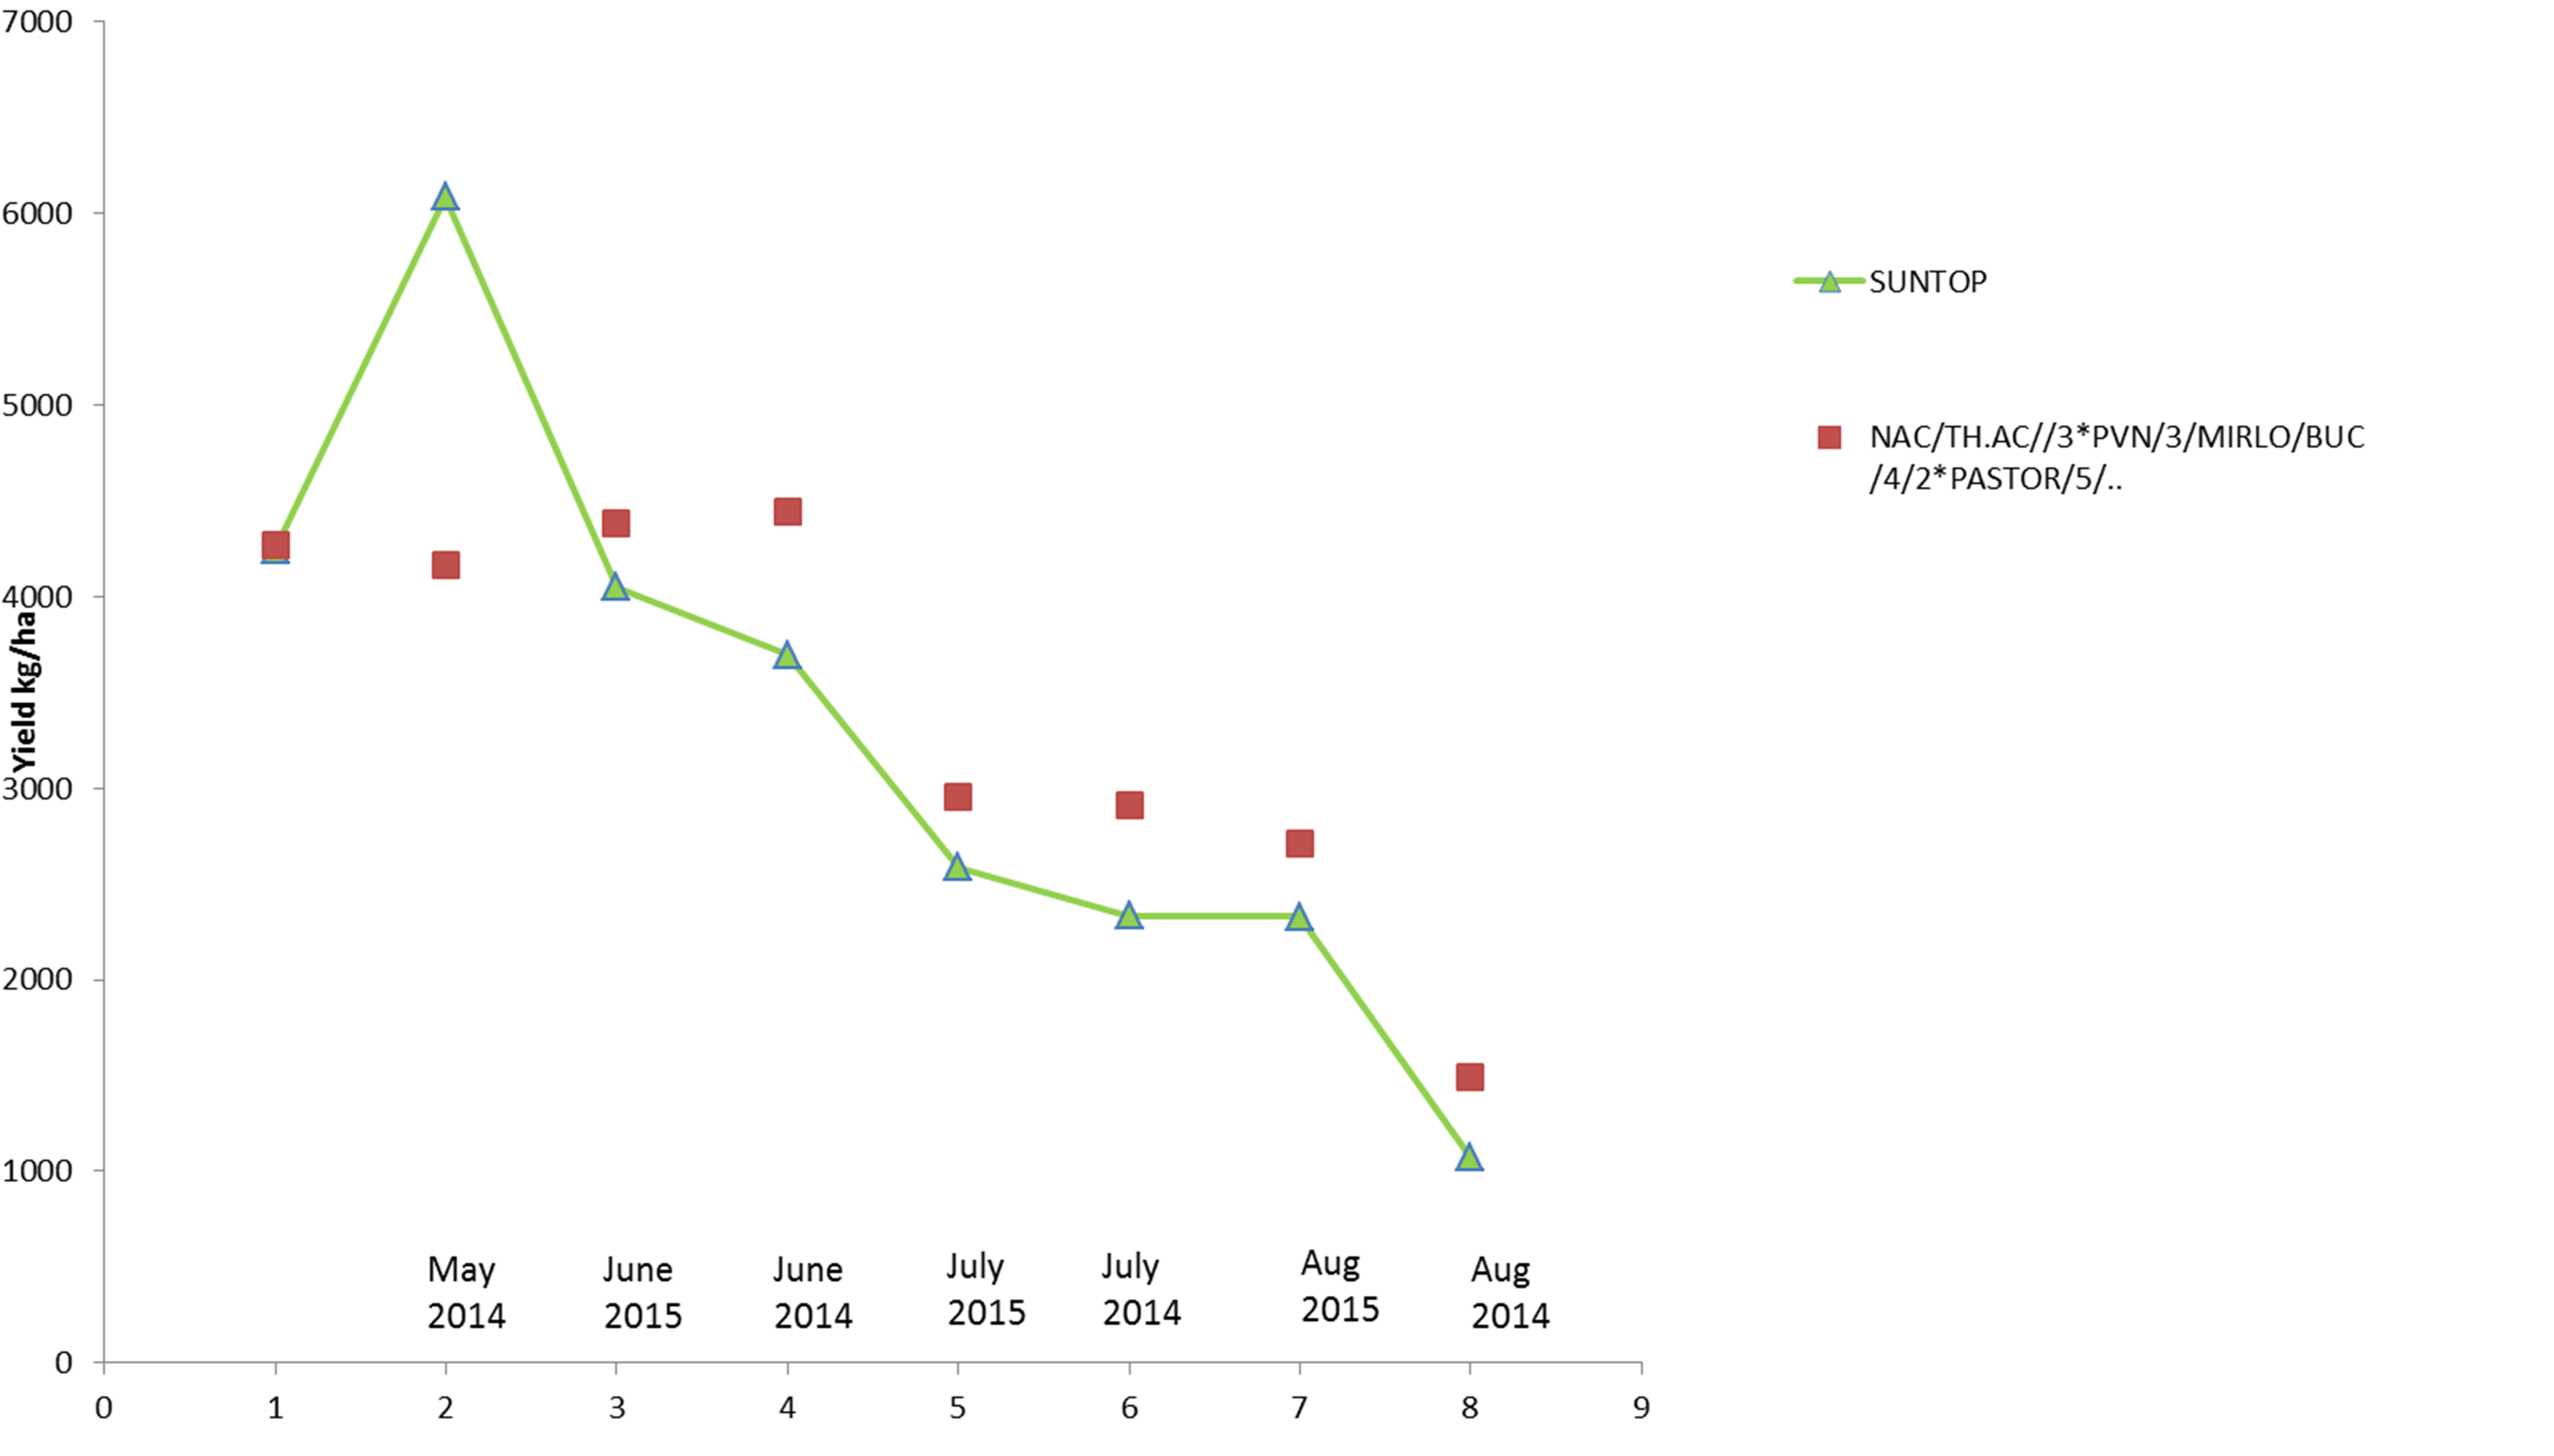 Figure 2. The yield of SUNTOP, and a new source of heat tolerance (NAC..) across dates of sowing at Narrabri in 2014 and 2015